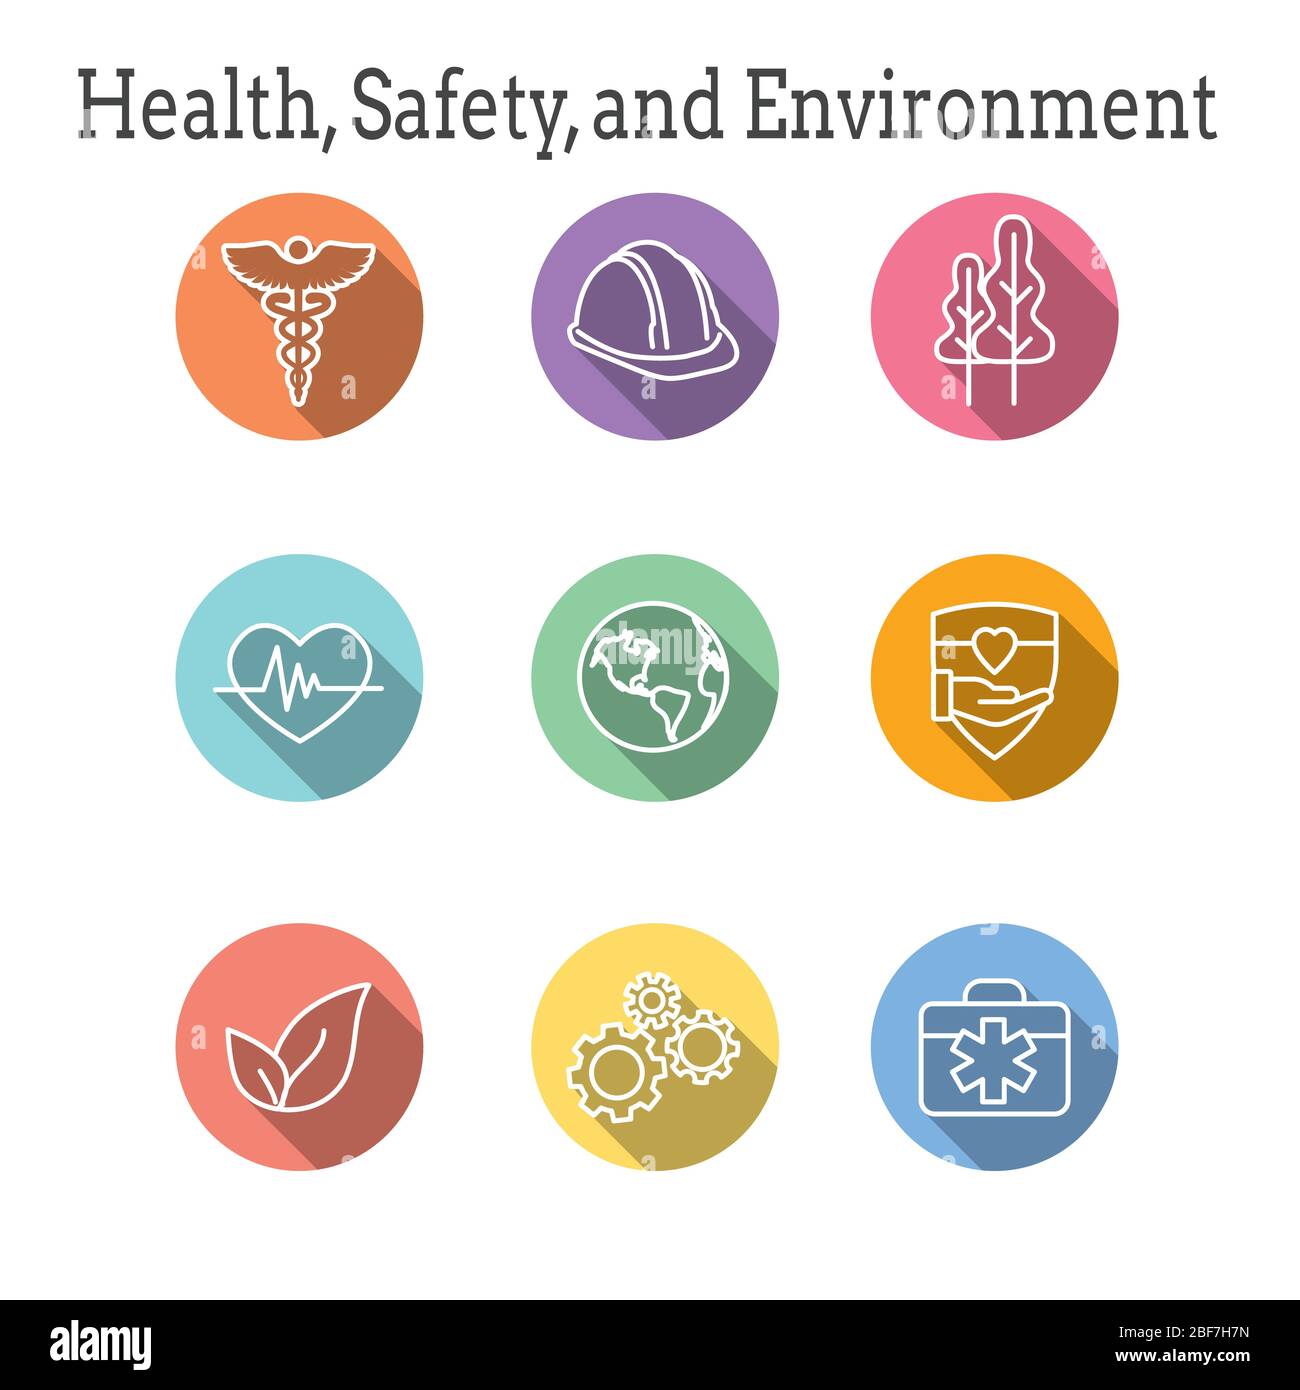 Health Safety & Environment Icon Set  with medical, safety, and leaves icons Stock Vector